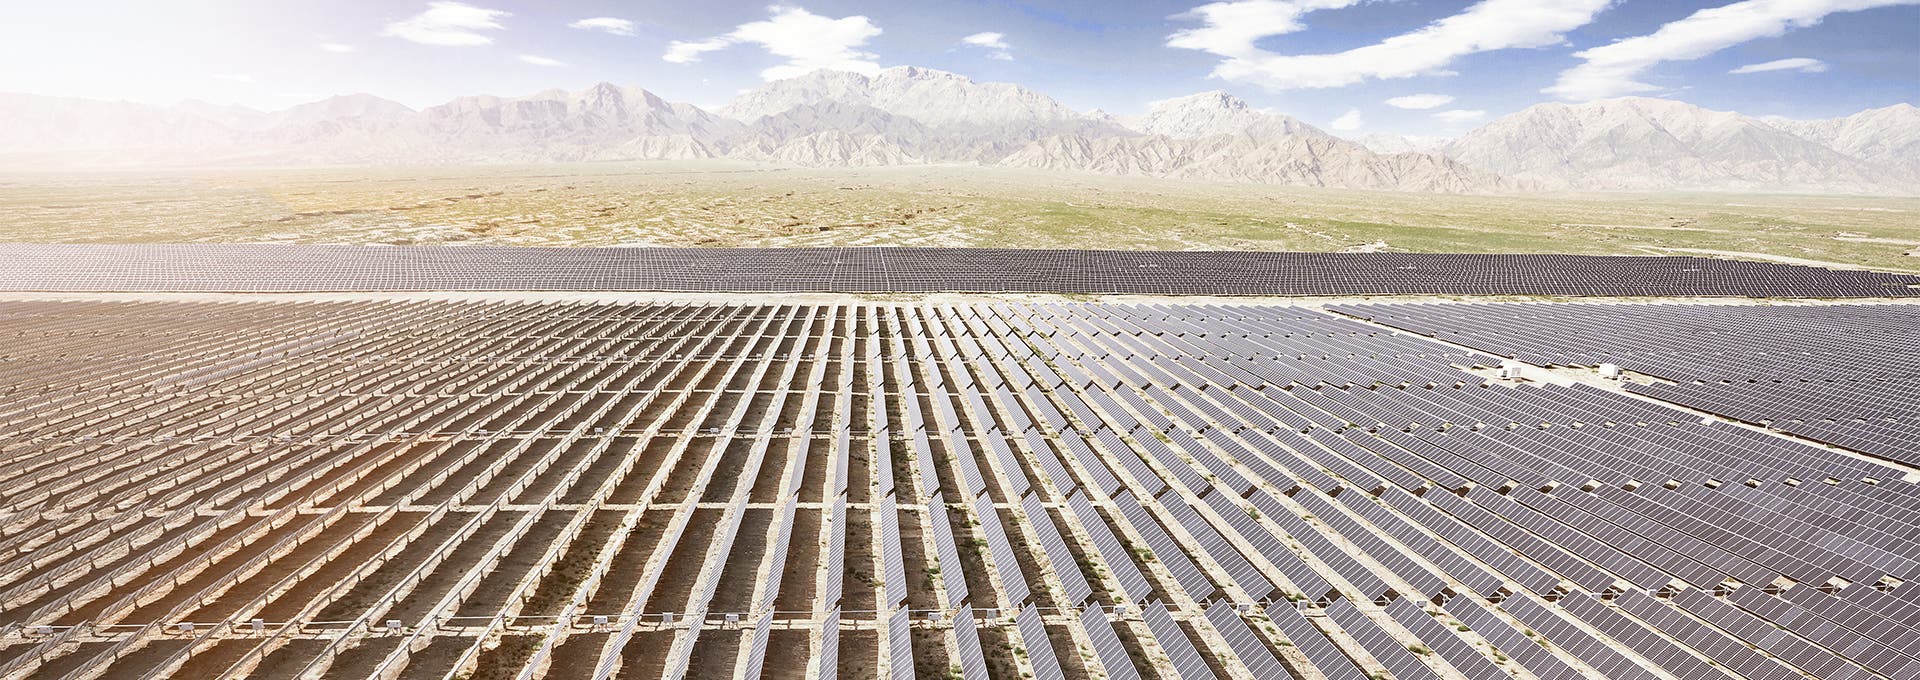 Aerial photography of a large solar photovoltaic power station in the desert, Aerial photography of a large solar photovoltaic power station i